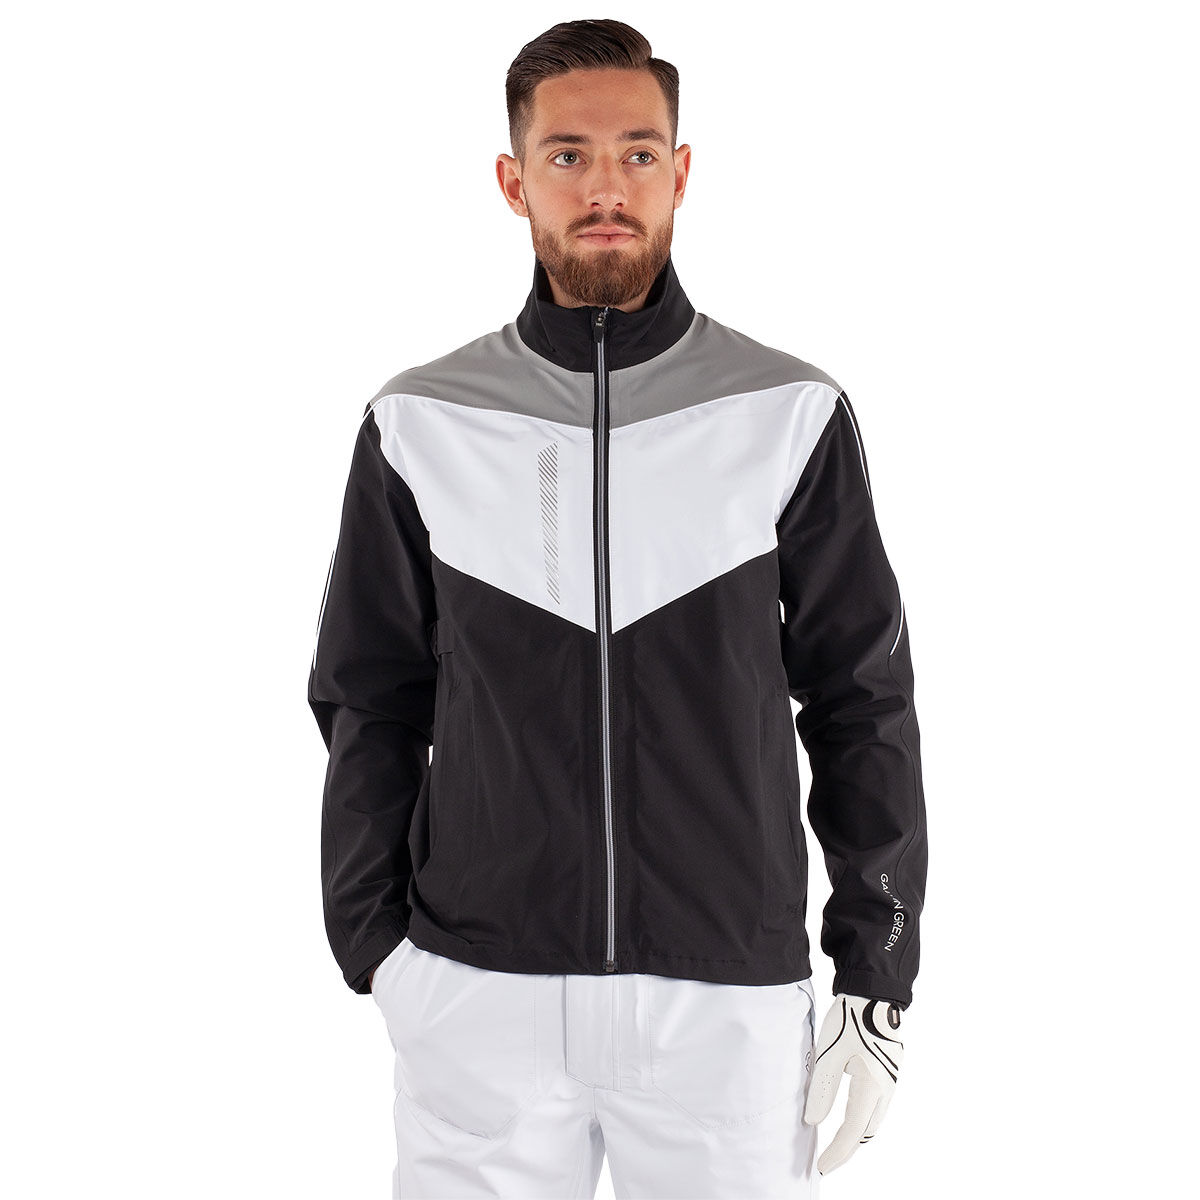 Galvin Green Mens Black and White Waterproof Colour Block Armstrong Golf Jacket, Size: Small| American Golf